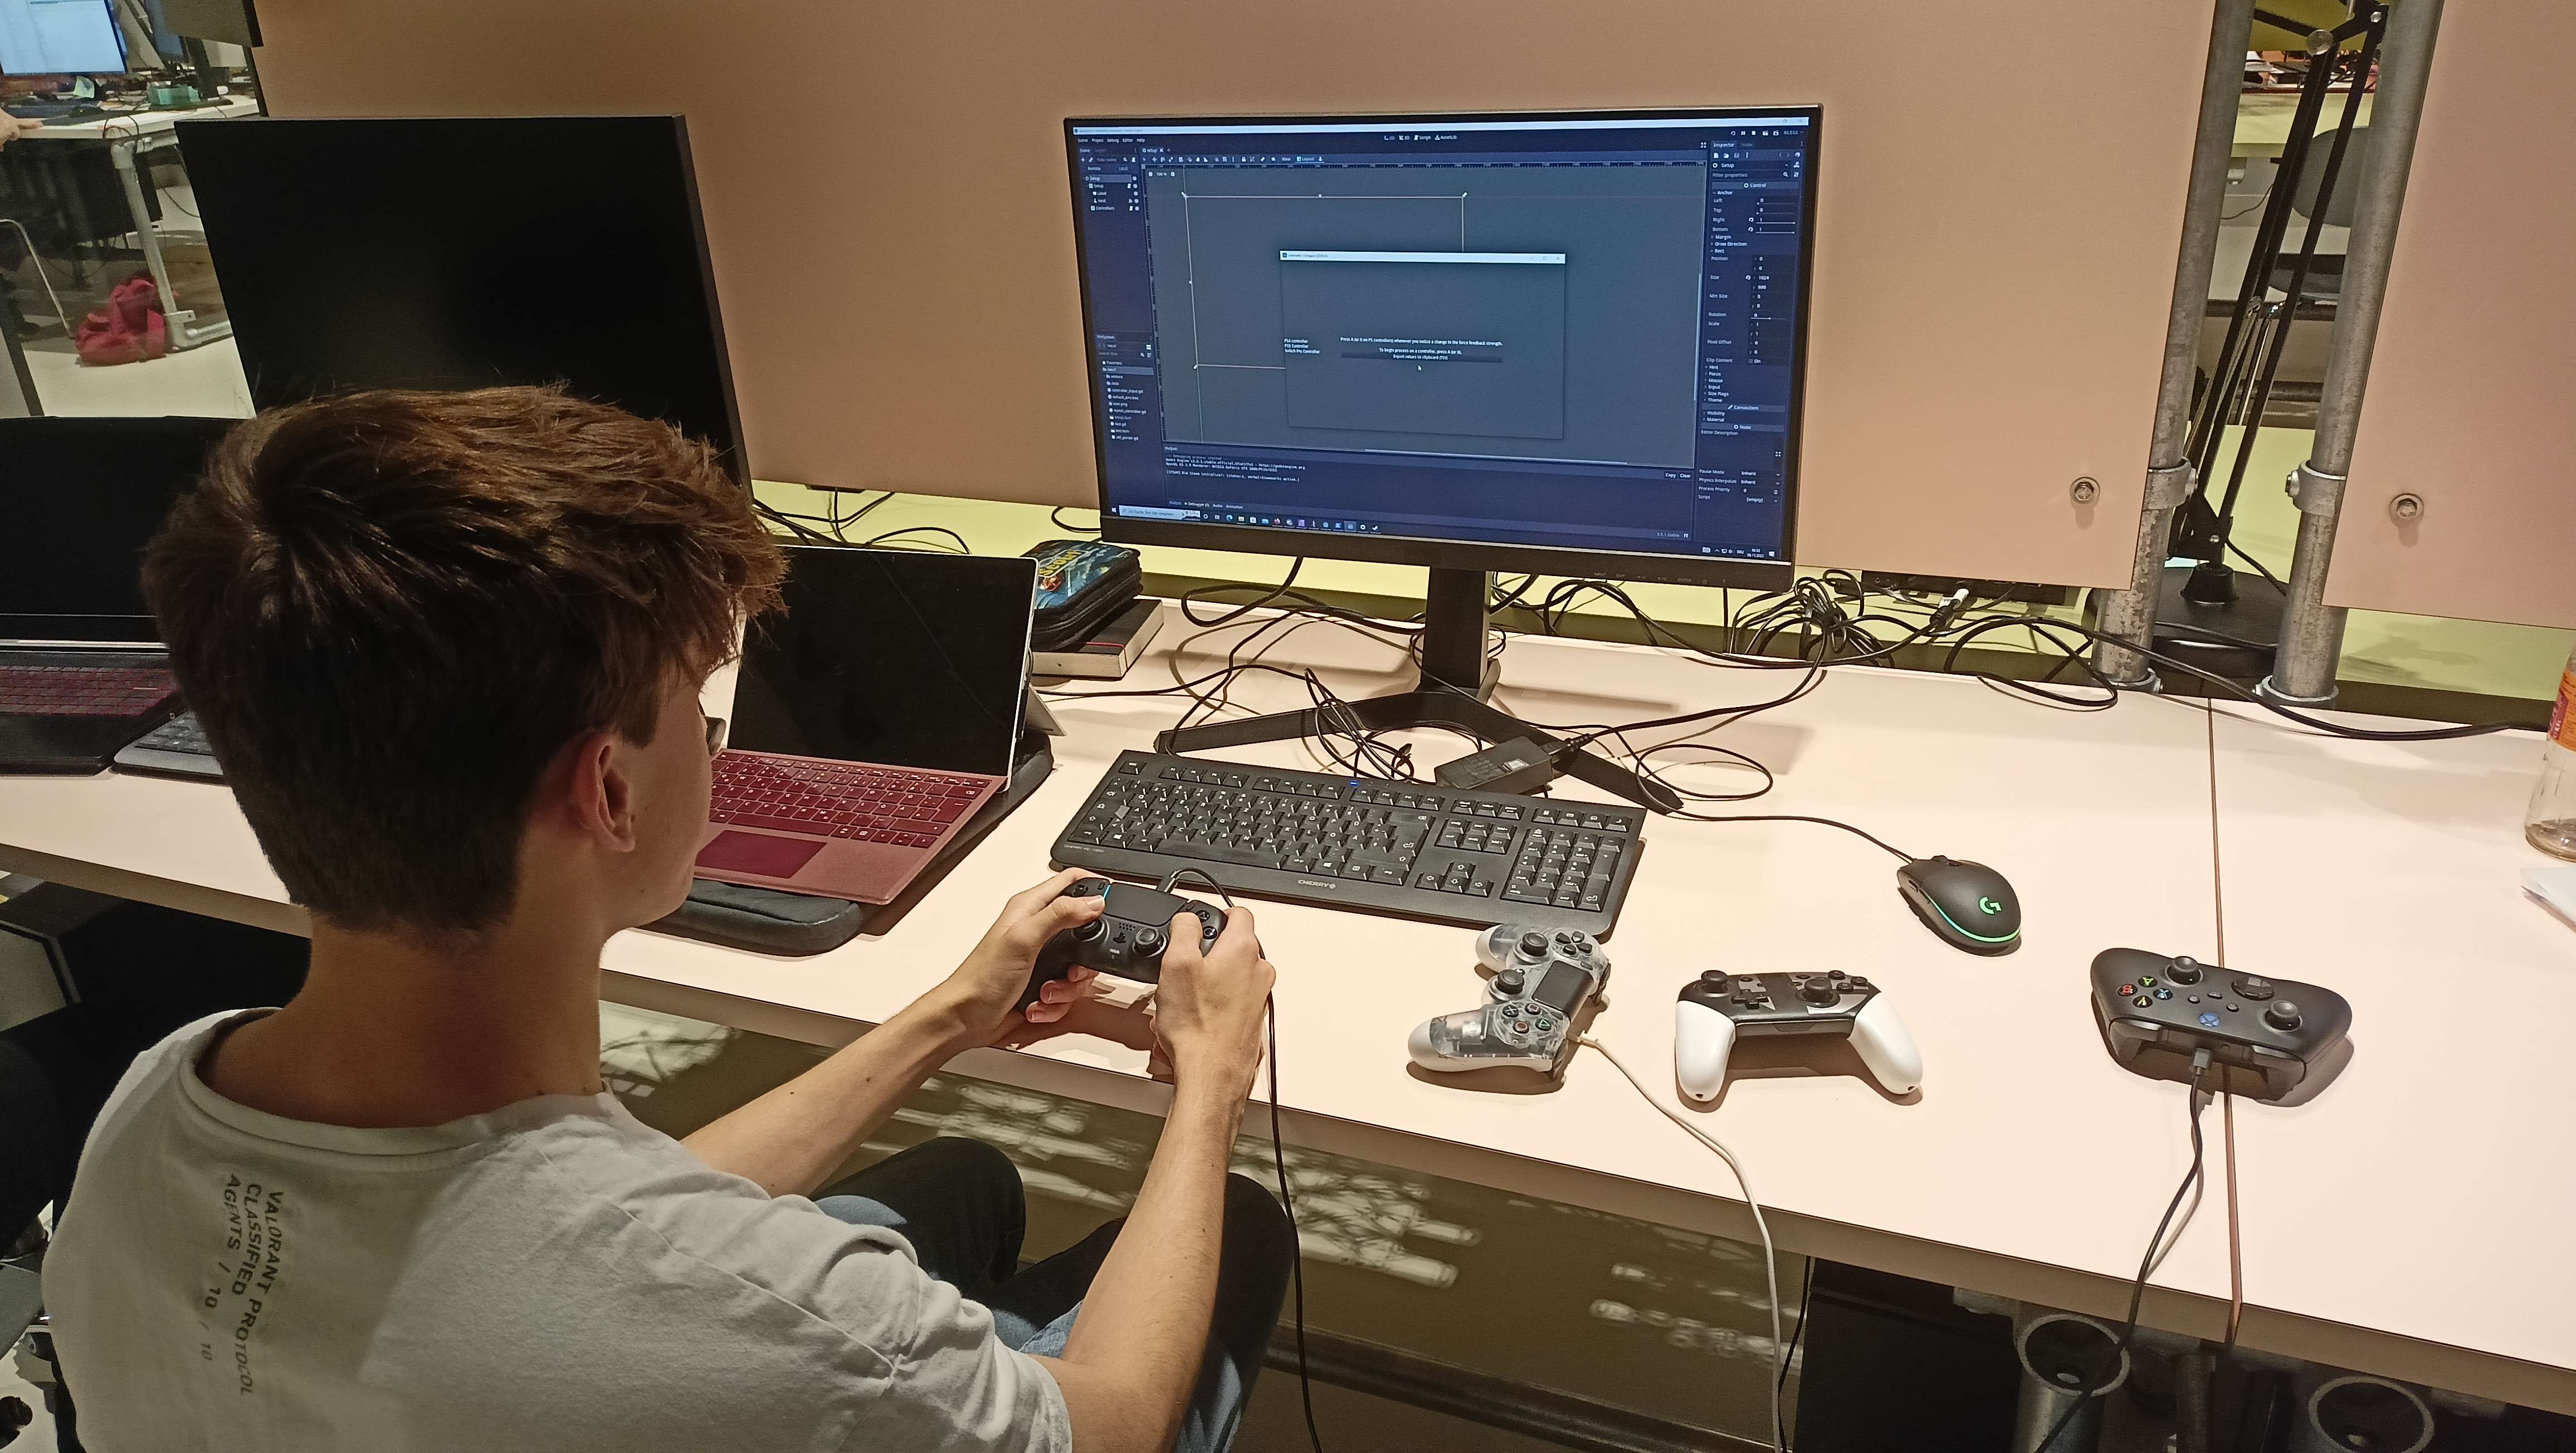 **Figure 13:** Photo of a typical test situation: A human is sitting in front of a computer, Godot with some UI is visible on the monitor, different controllers are on the table and one is being tested with.